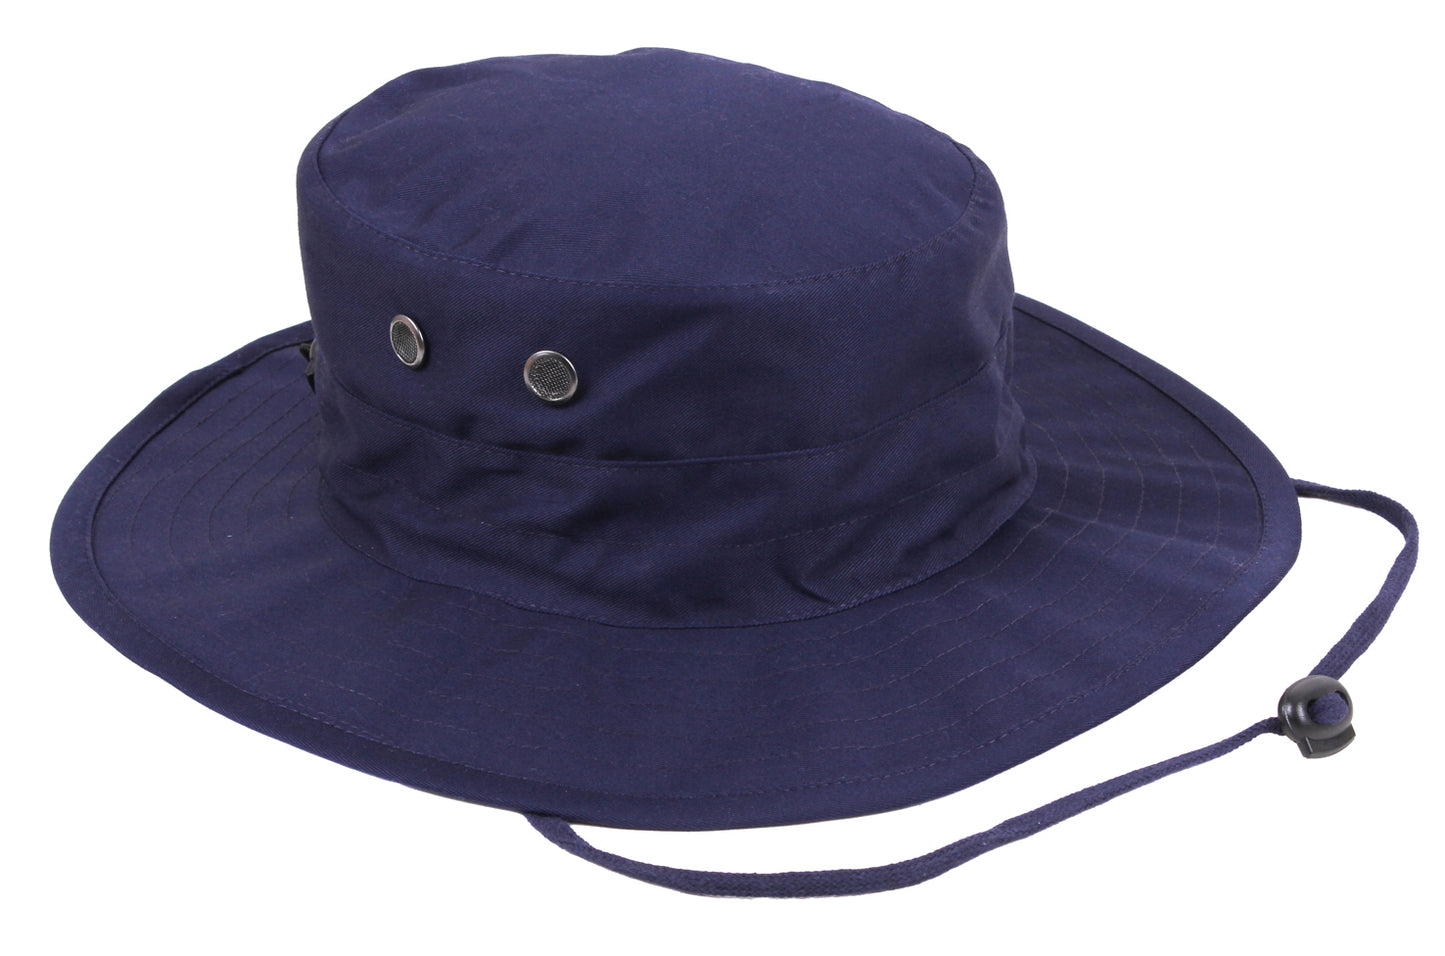 Navy Blue Adjustable Boonie Bucket Hat - Rothco Outdoor Bush Hat w/ Chin Strap